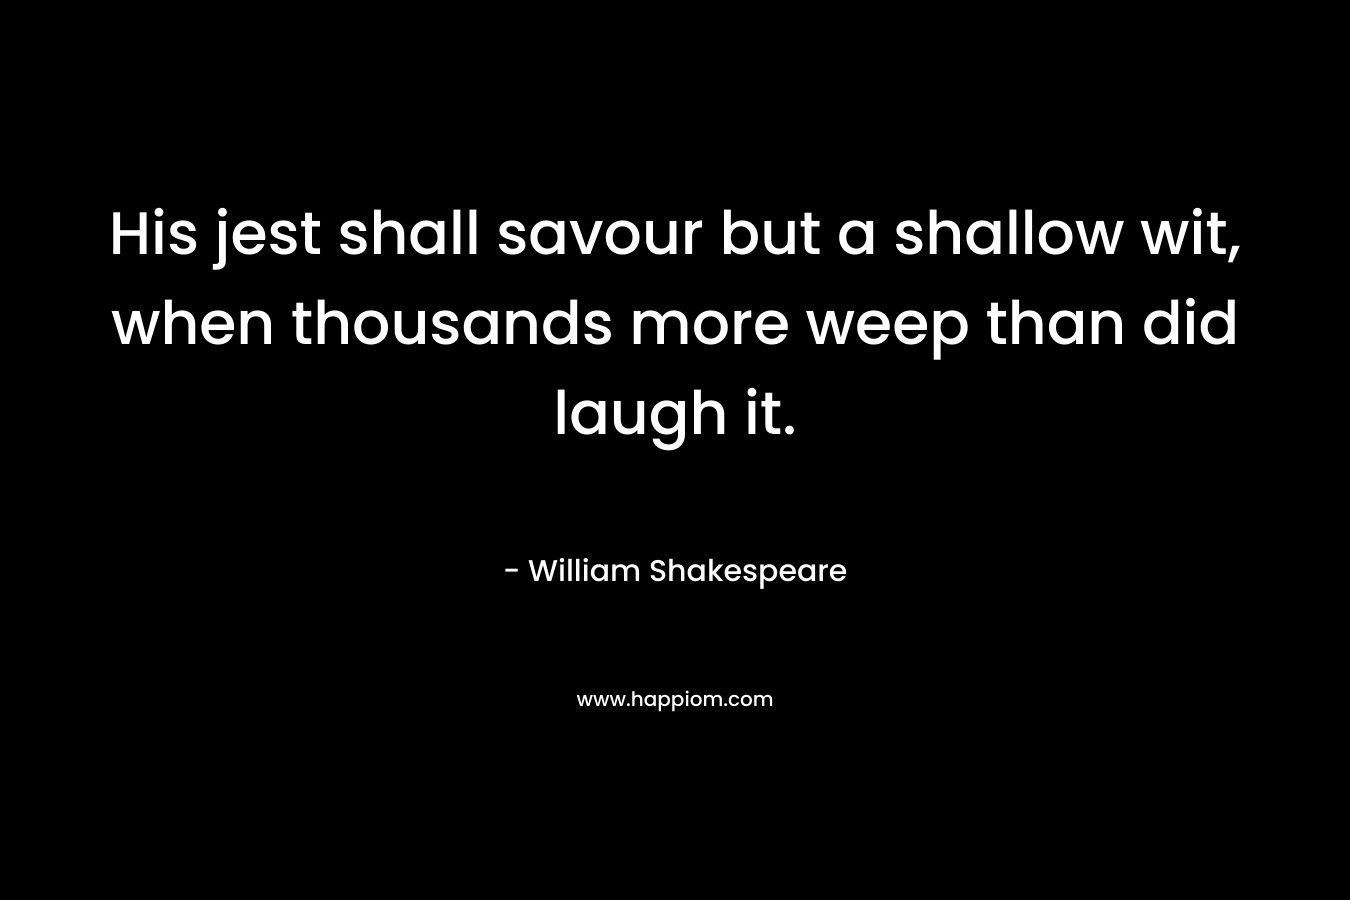 His jest shall savour but a shallow wit, when thousands more weep than did laugh it. – William Shakespeare